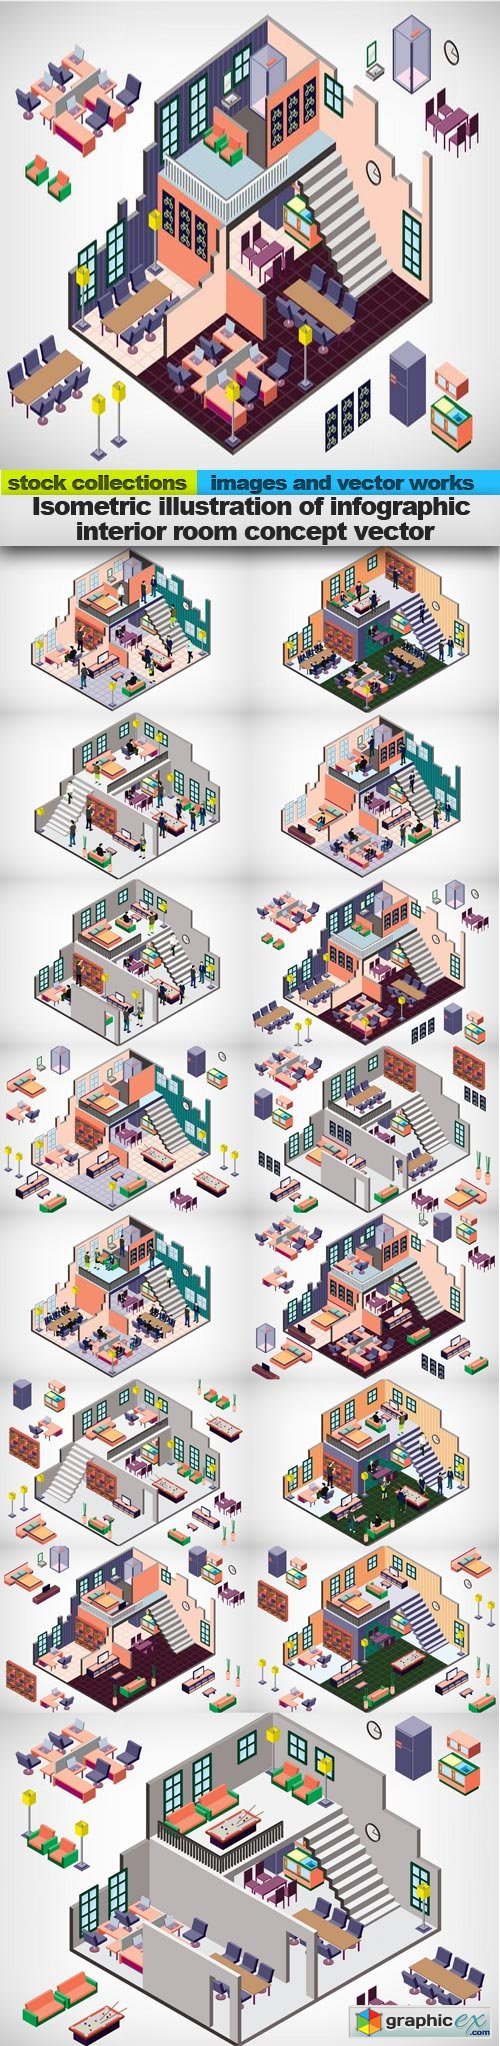 Isometric illustration of infographic interior room concept vector, 15 x EPS